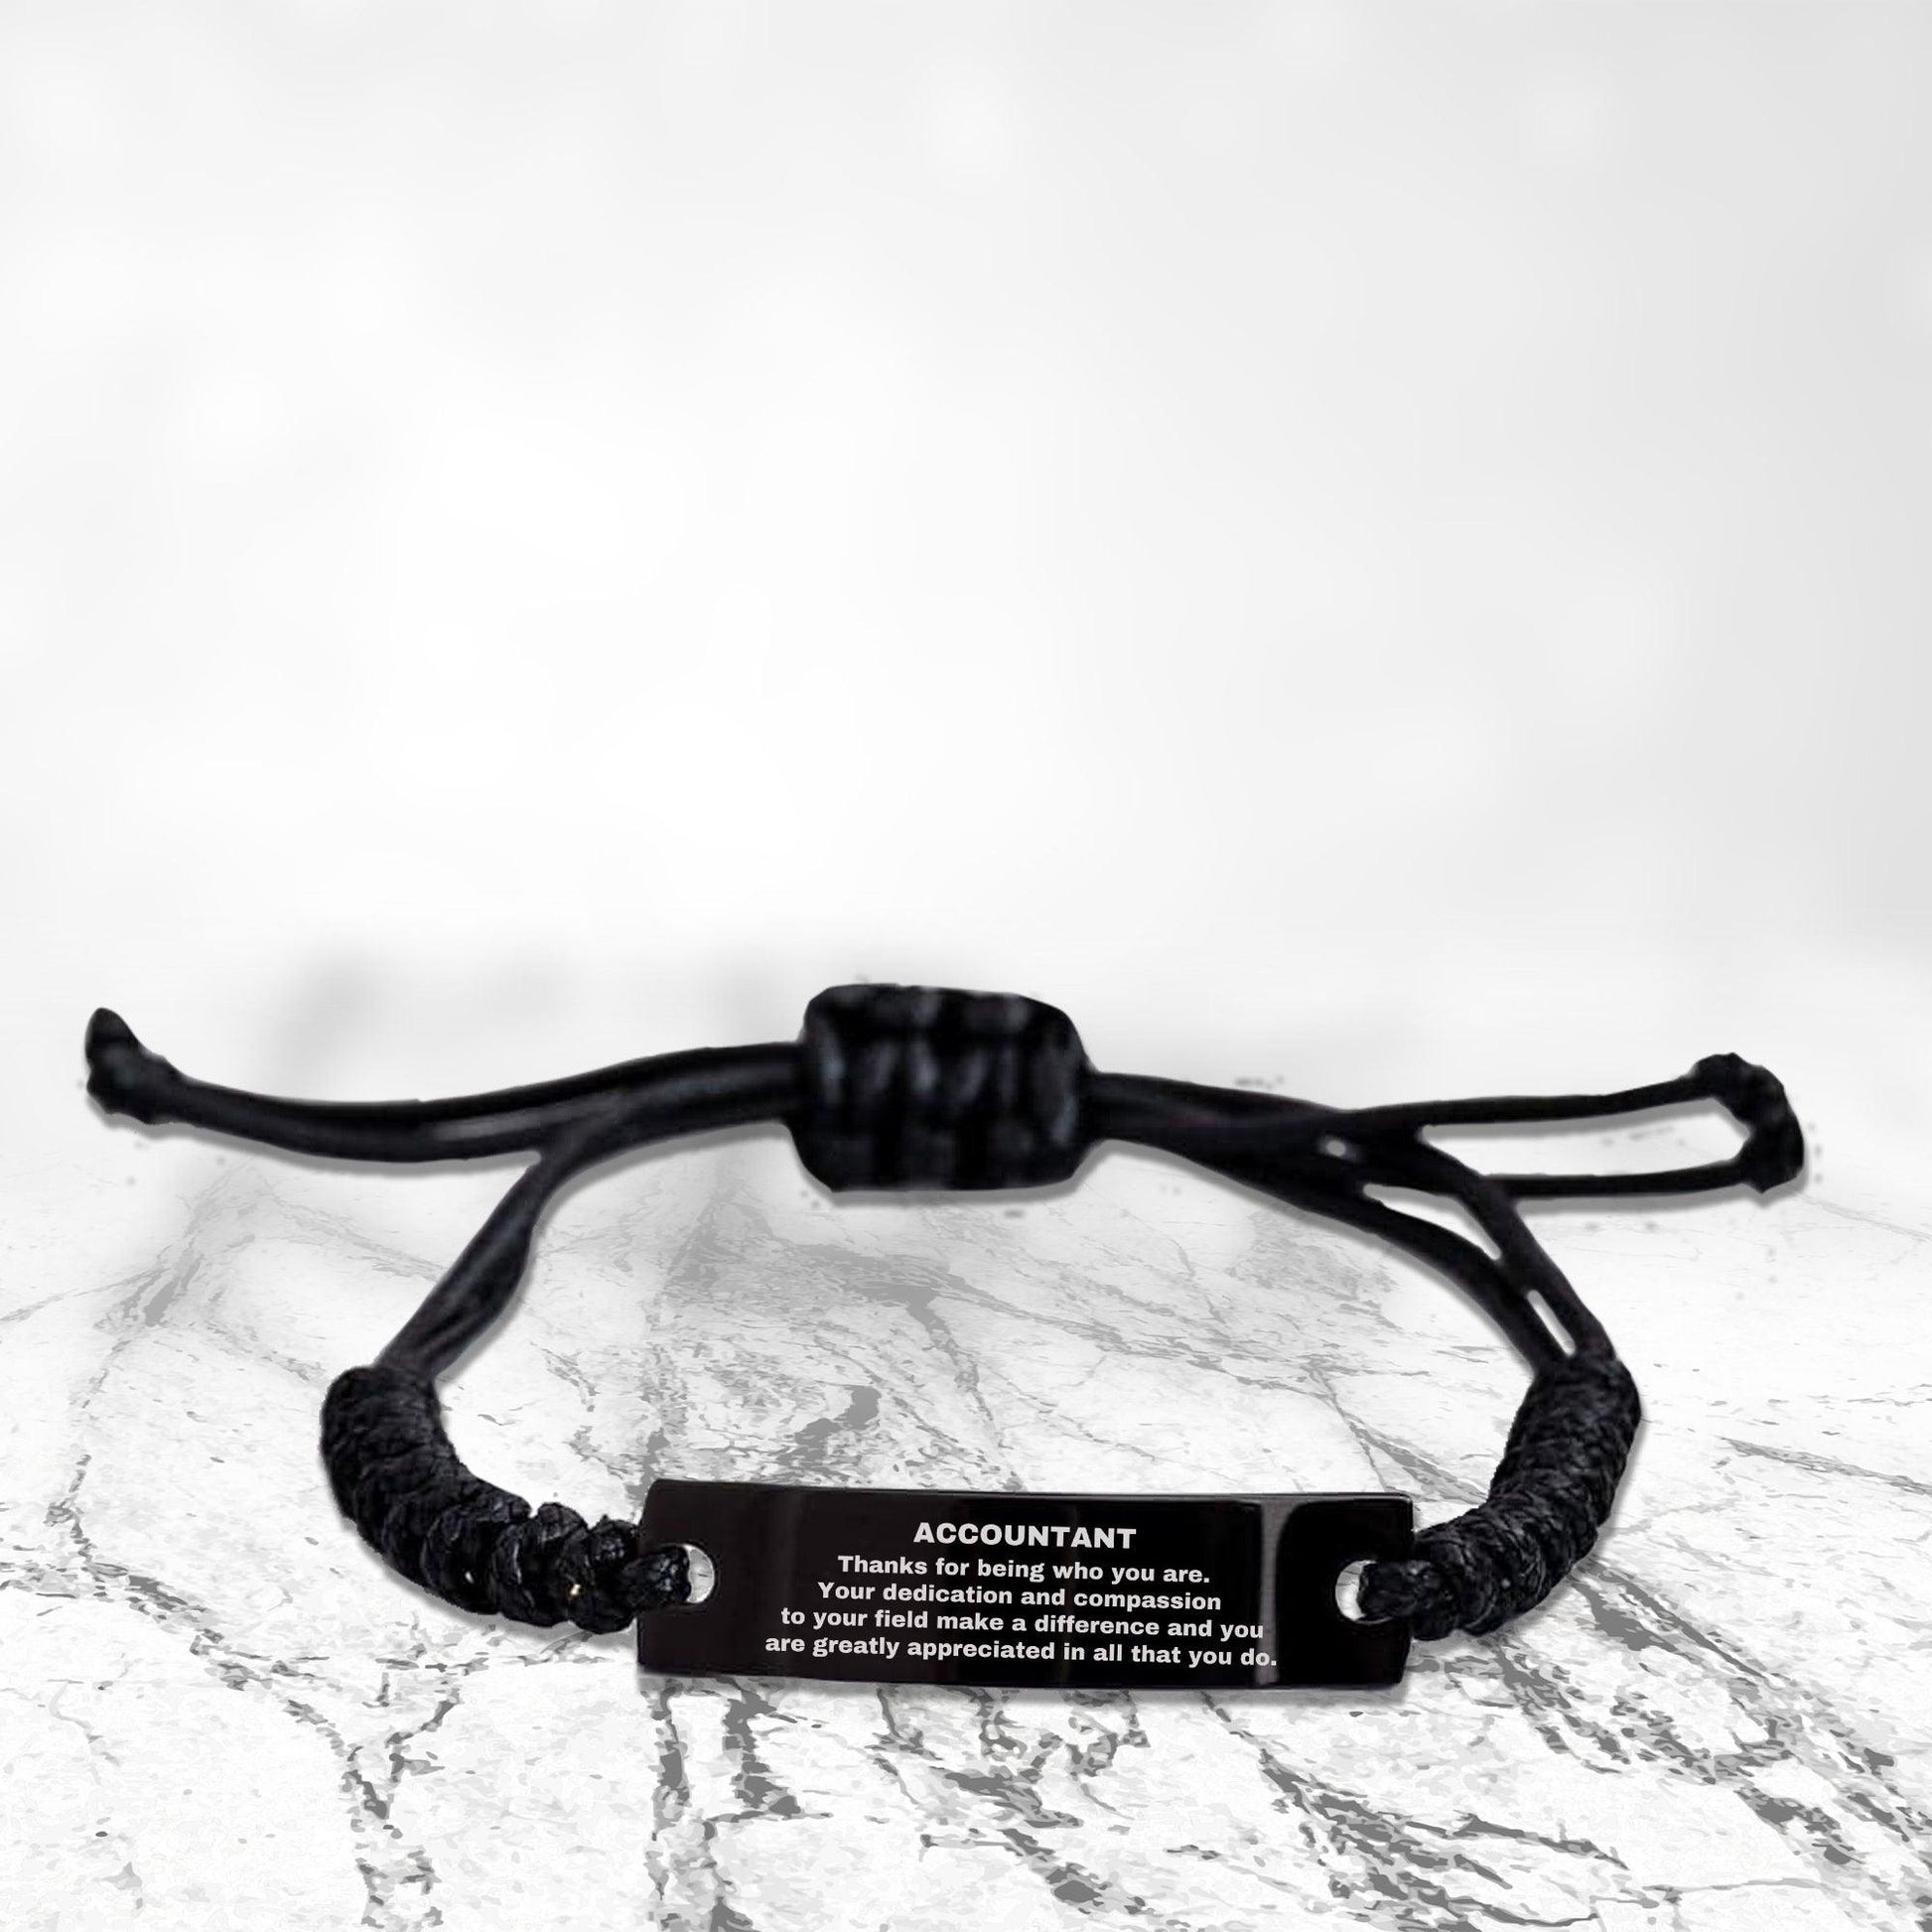 Accountant Black Braided Leather Rope Engraved Bracelet - Thanks for being who you are - Birthday Christmas Jewelry Gifts Coworkers Colleague Boss - Mallard Moon Gift Shop